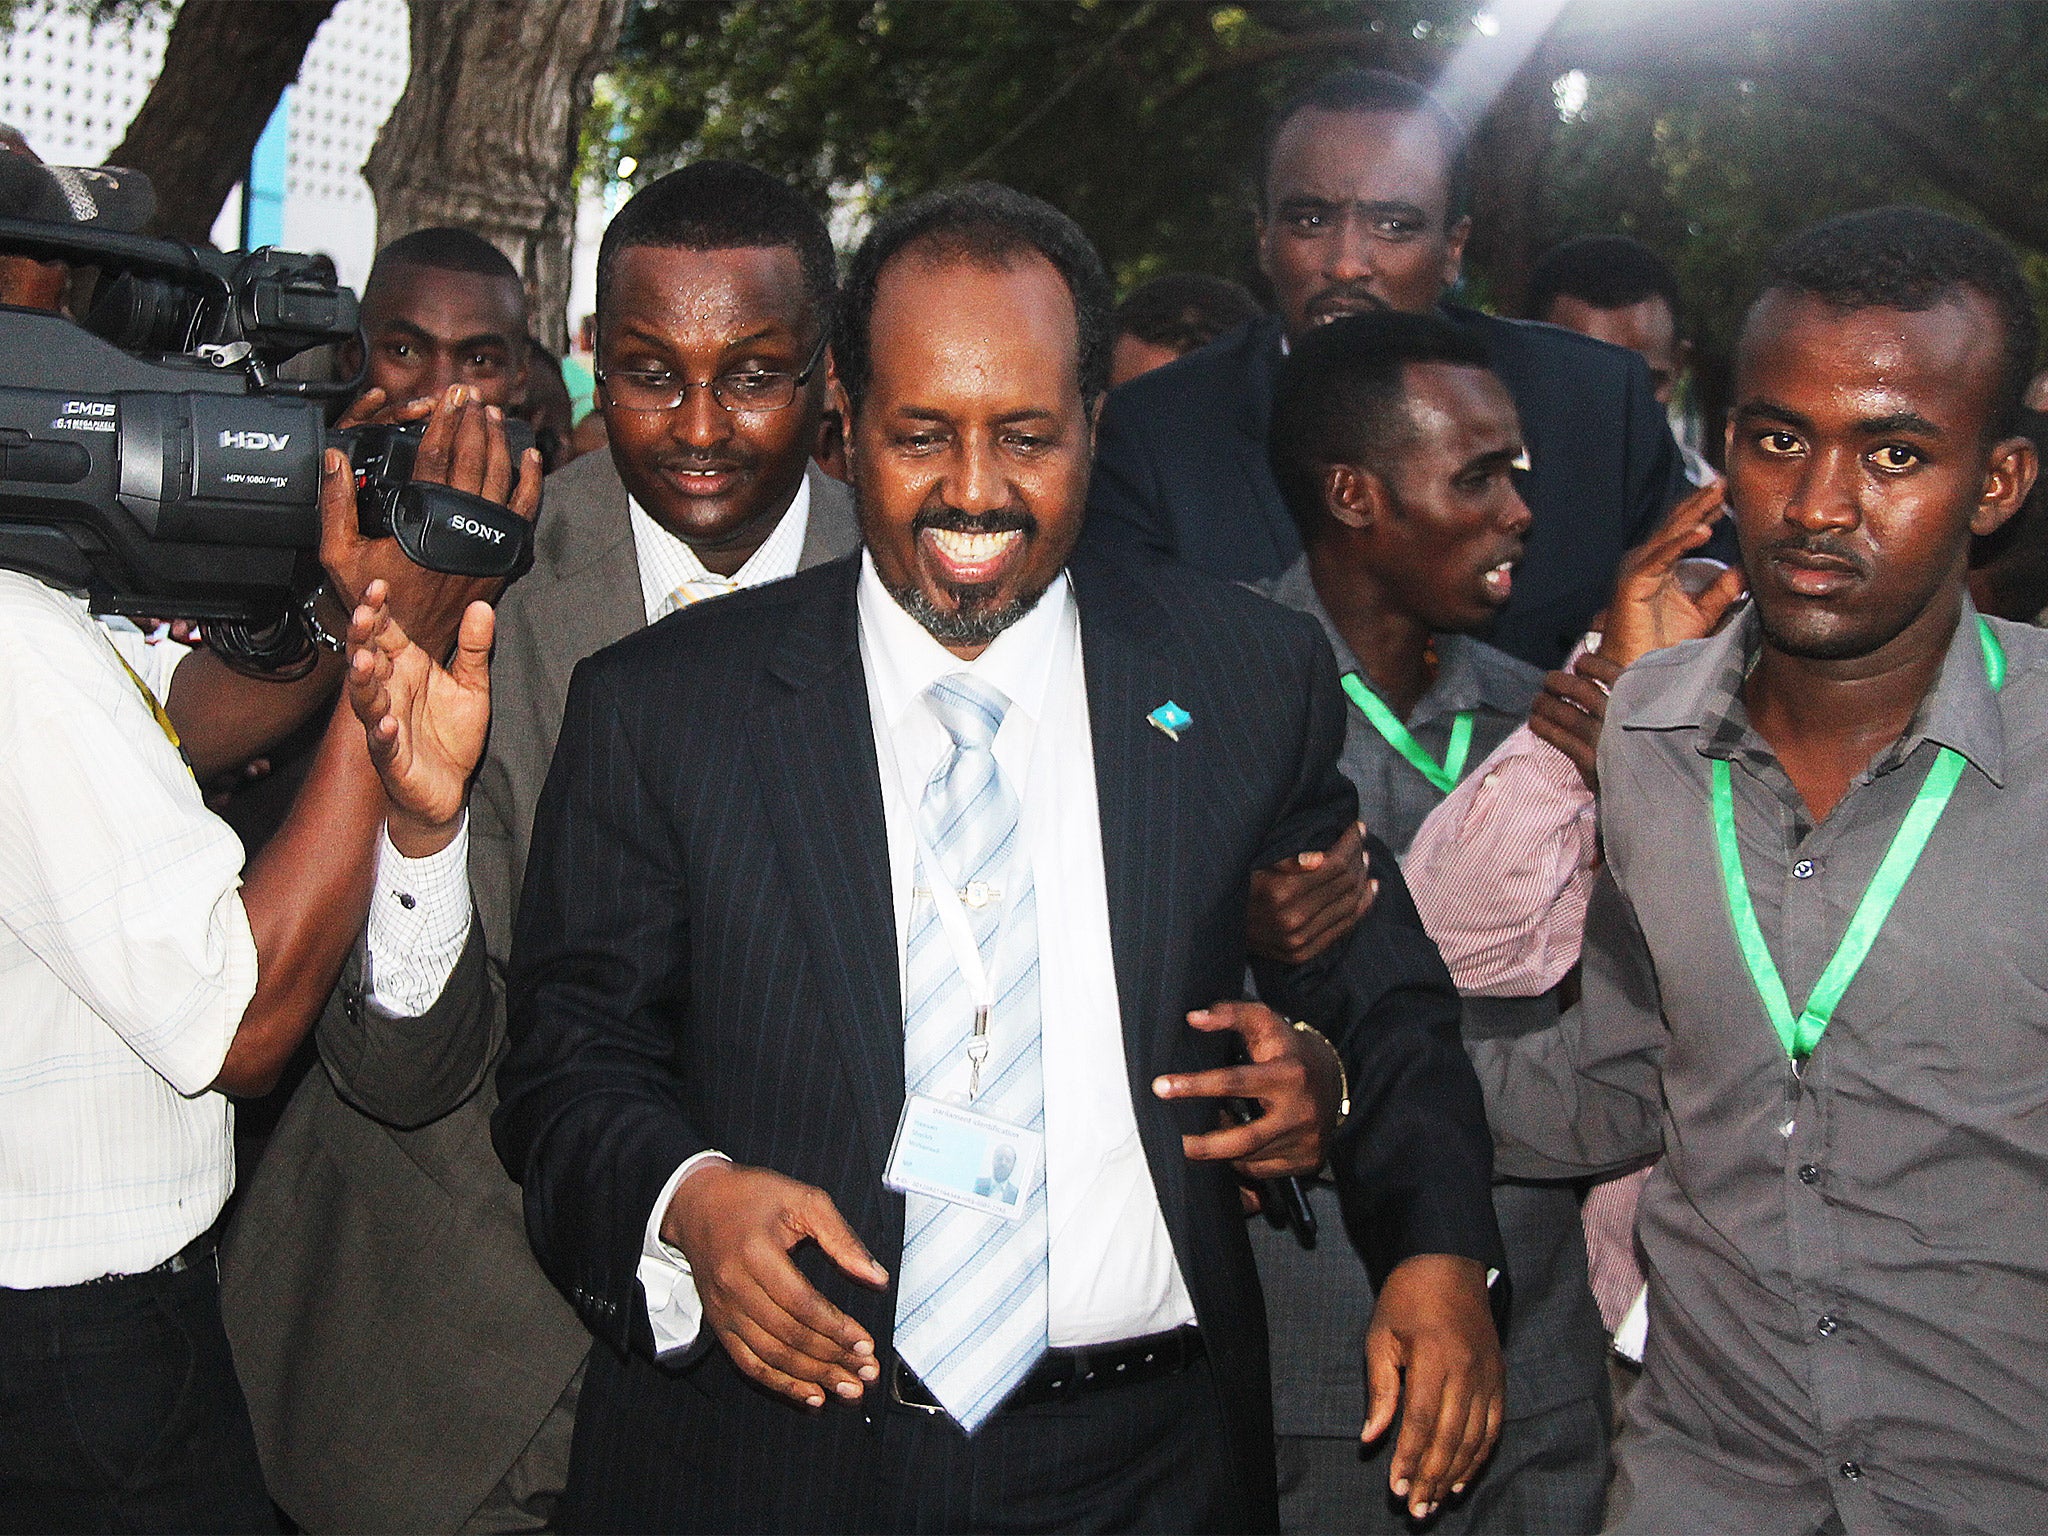 President Hassan Sheikh Mohamud was linked to the group which attacked a Nairobi shopping centre in 2013